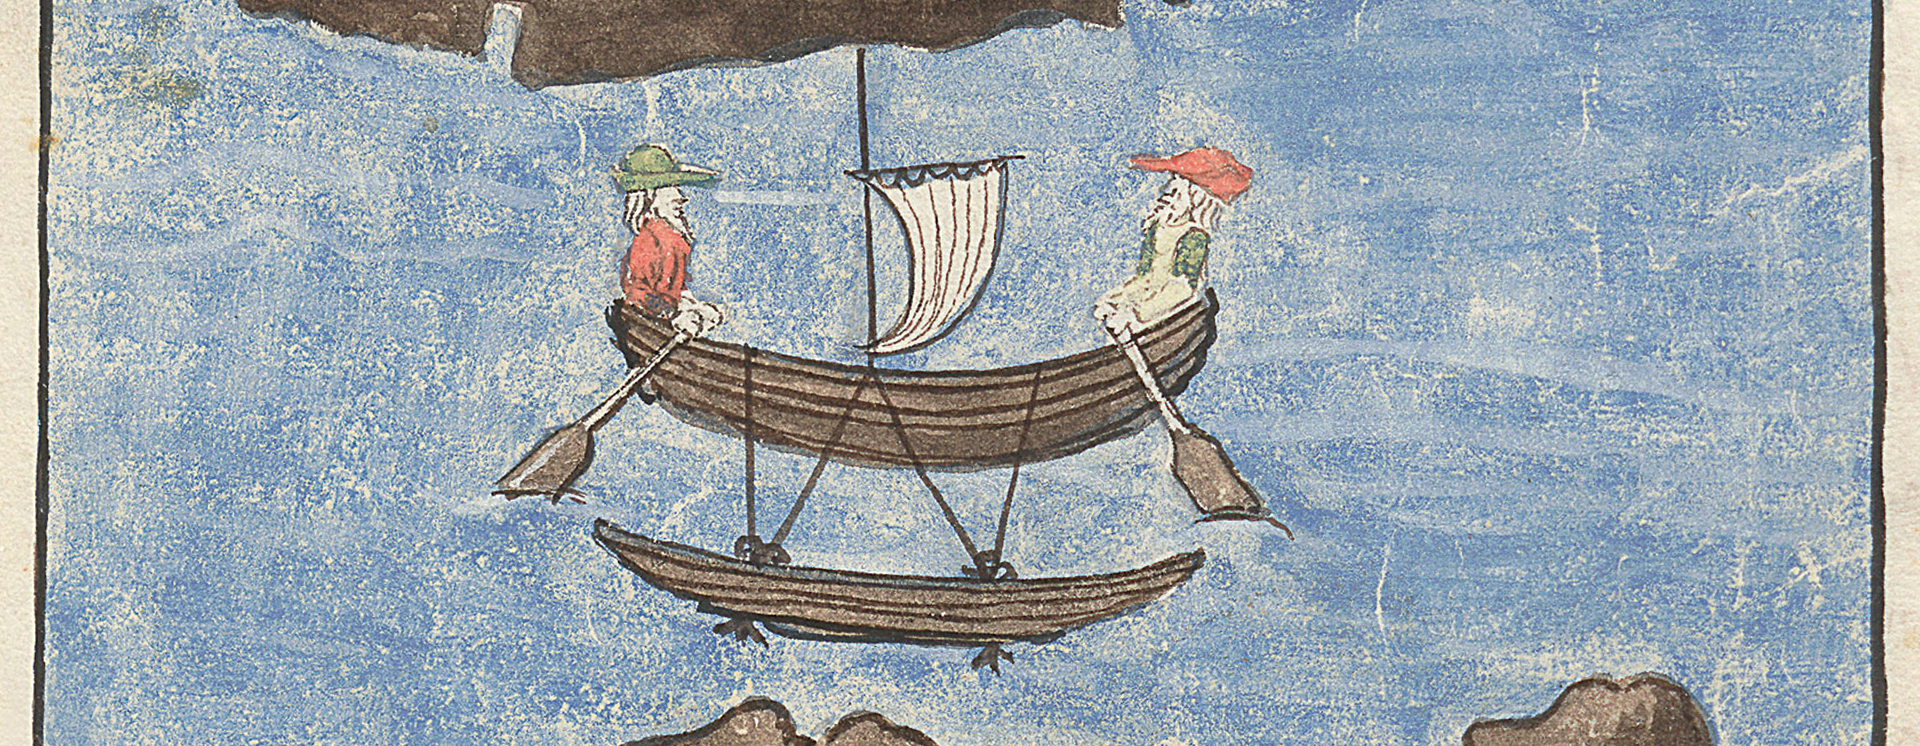 From the Ambrosiana manuscript: Boat (Islands of the Thieves), c. 16v